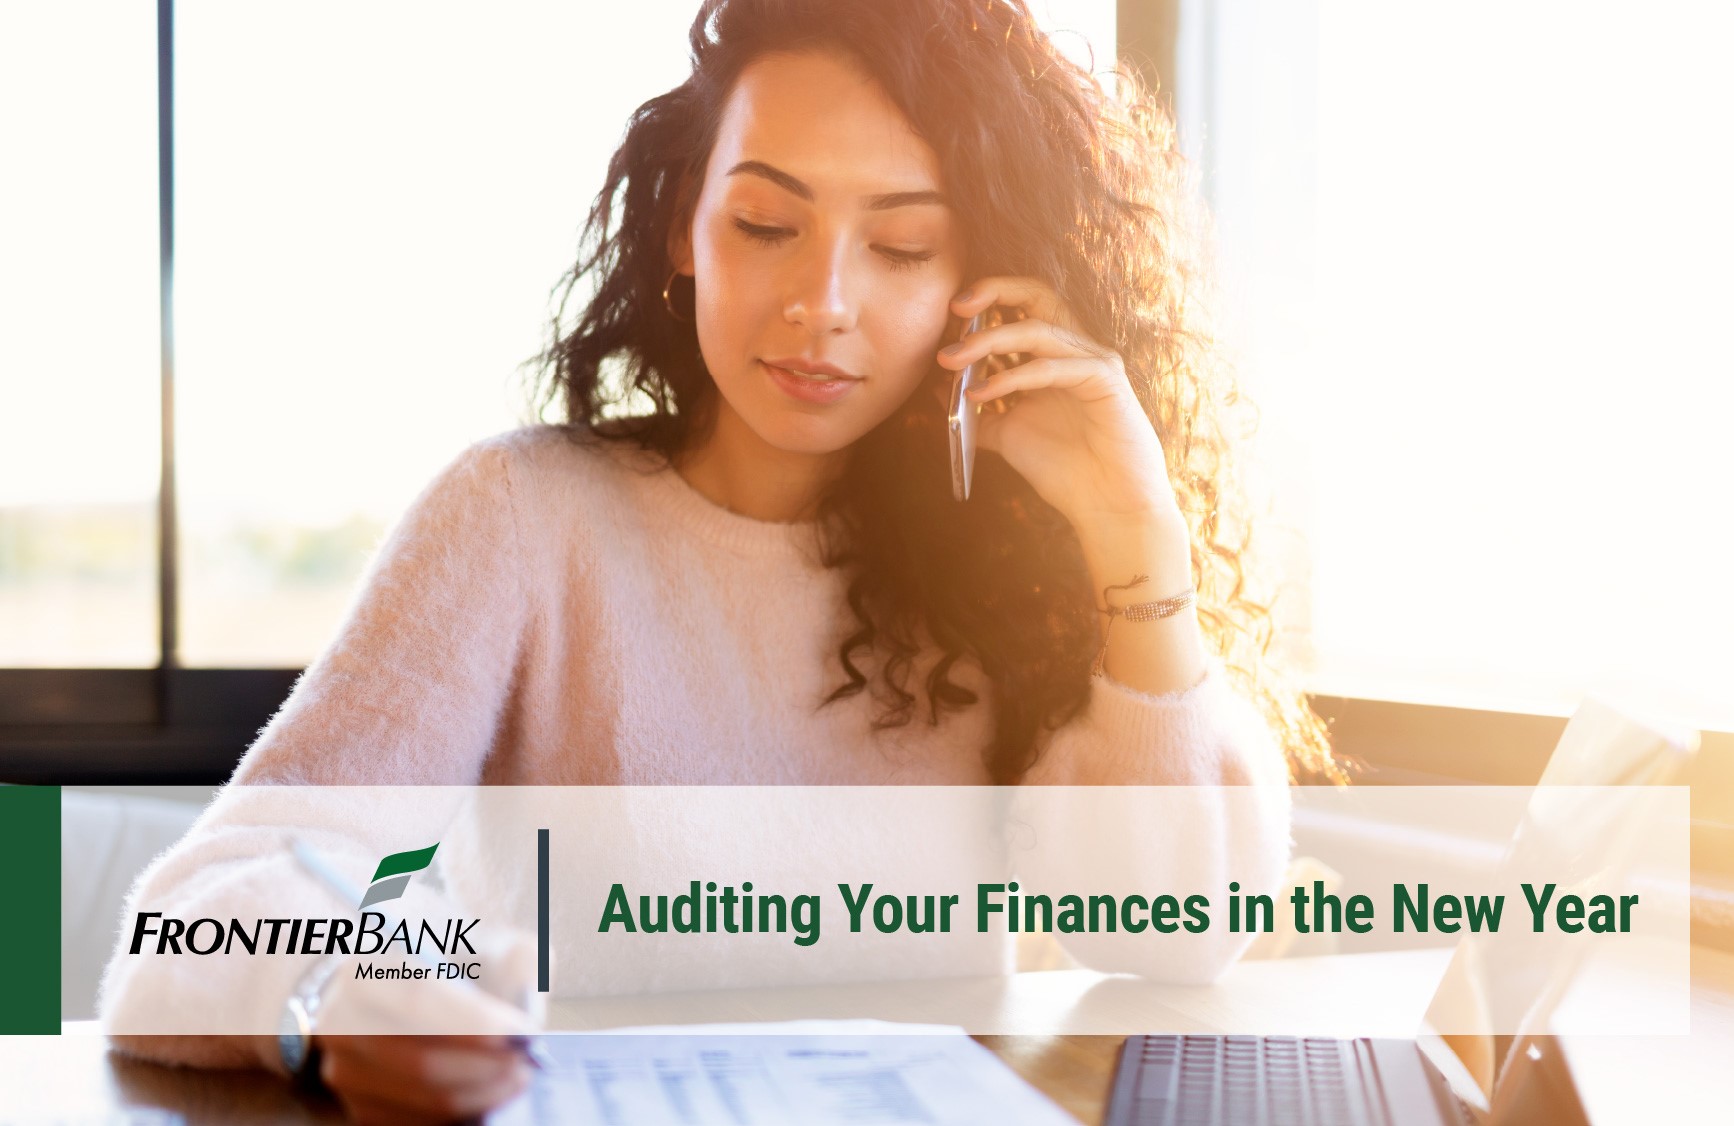 Auditing Your Finances in the New Year with text